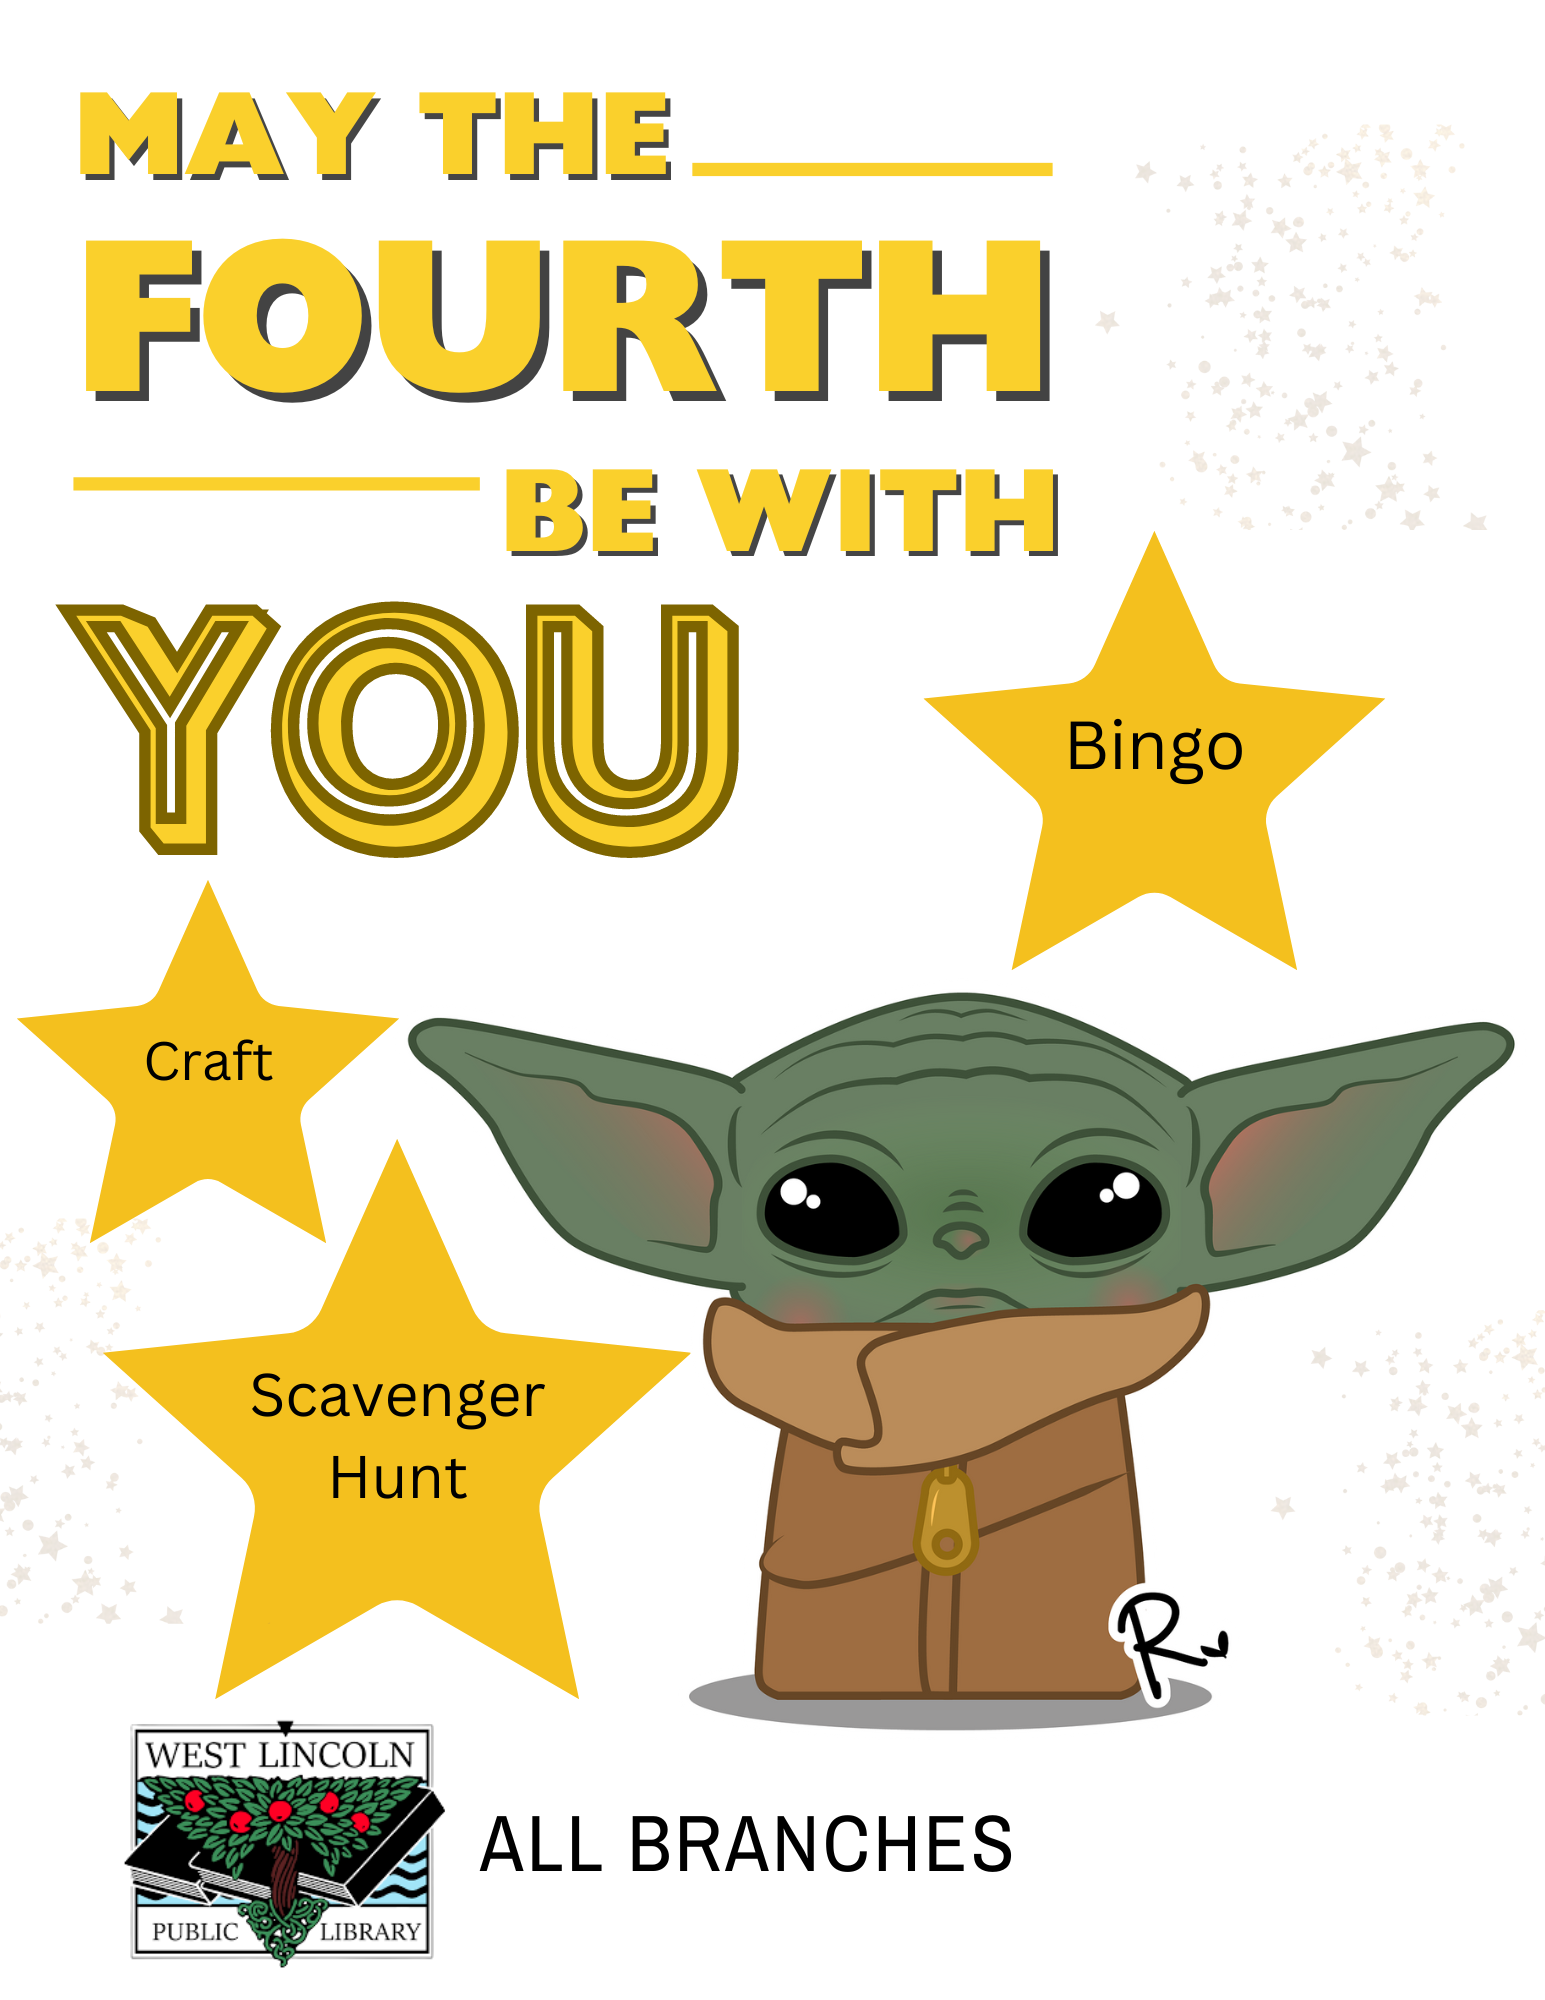 Poster for May the Fourth Be With You, Craft, Bingo, Game, Scavenger Hunt. All branches.